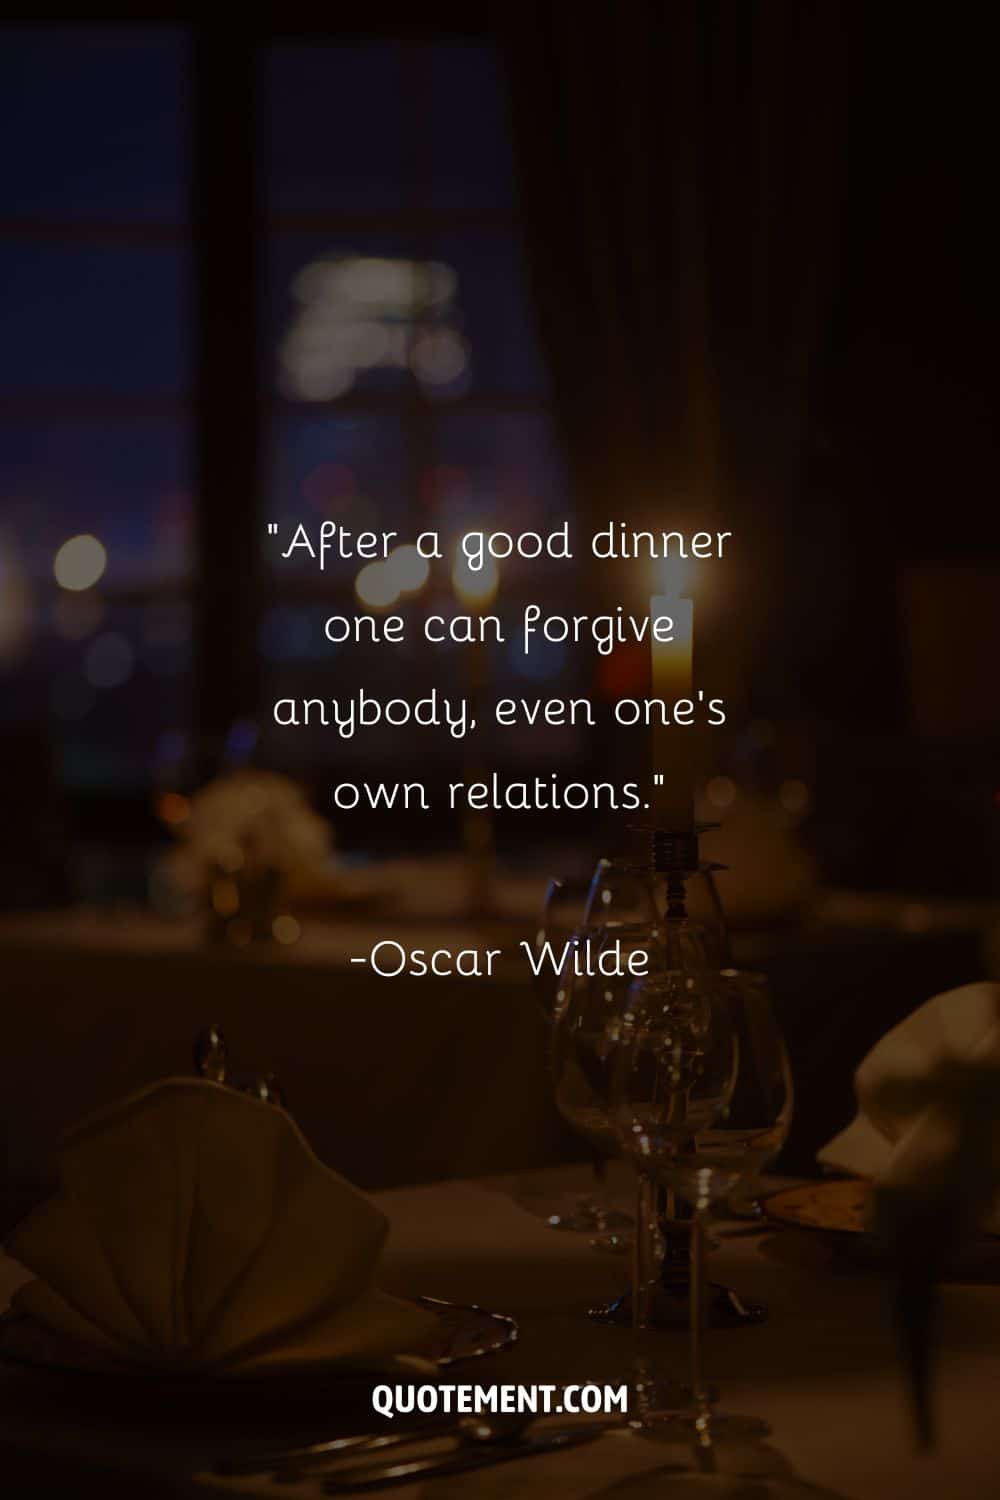 Photograph of a dinner table representing a dinner quote